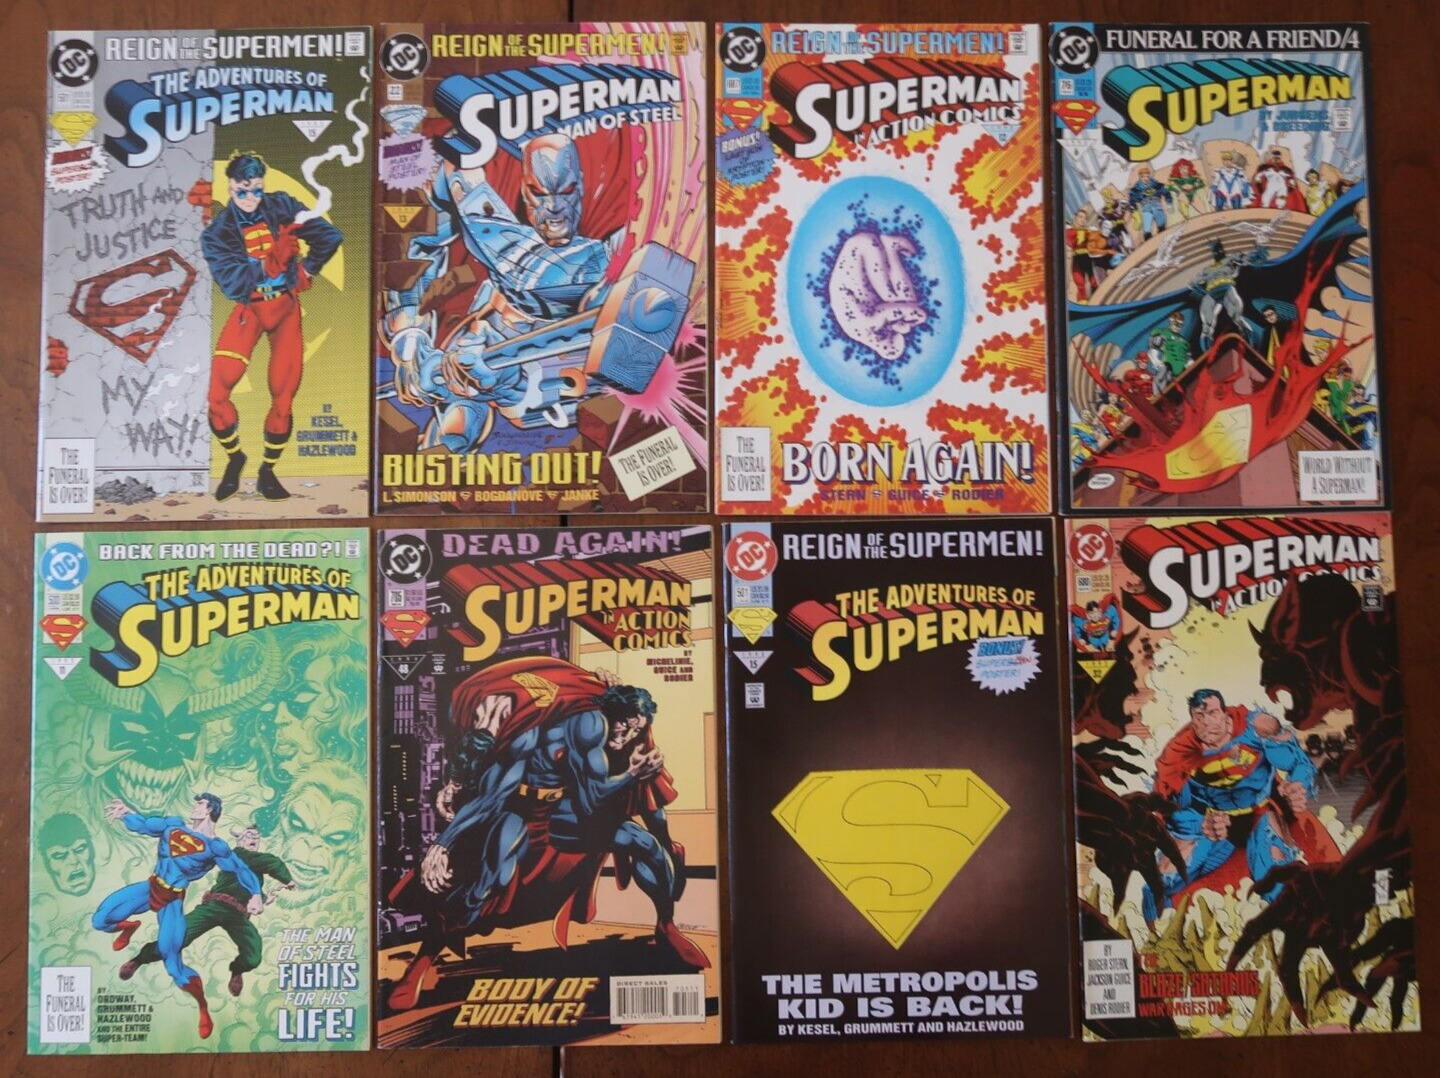 LOT OF 8 SUPERMAN COMIC BOOKS VARIOUS TITLES DC MODERN AGE  NICE GROUP Z2659